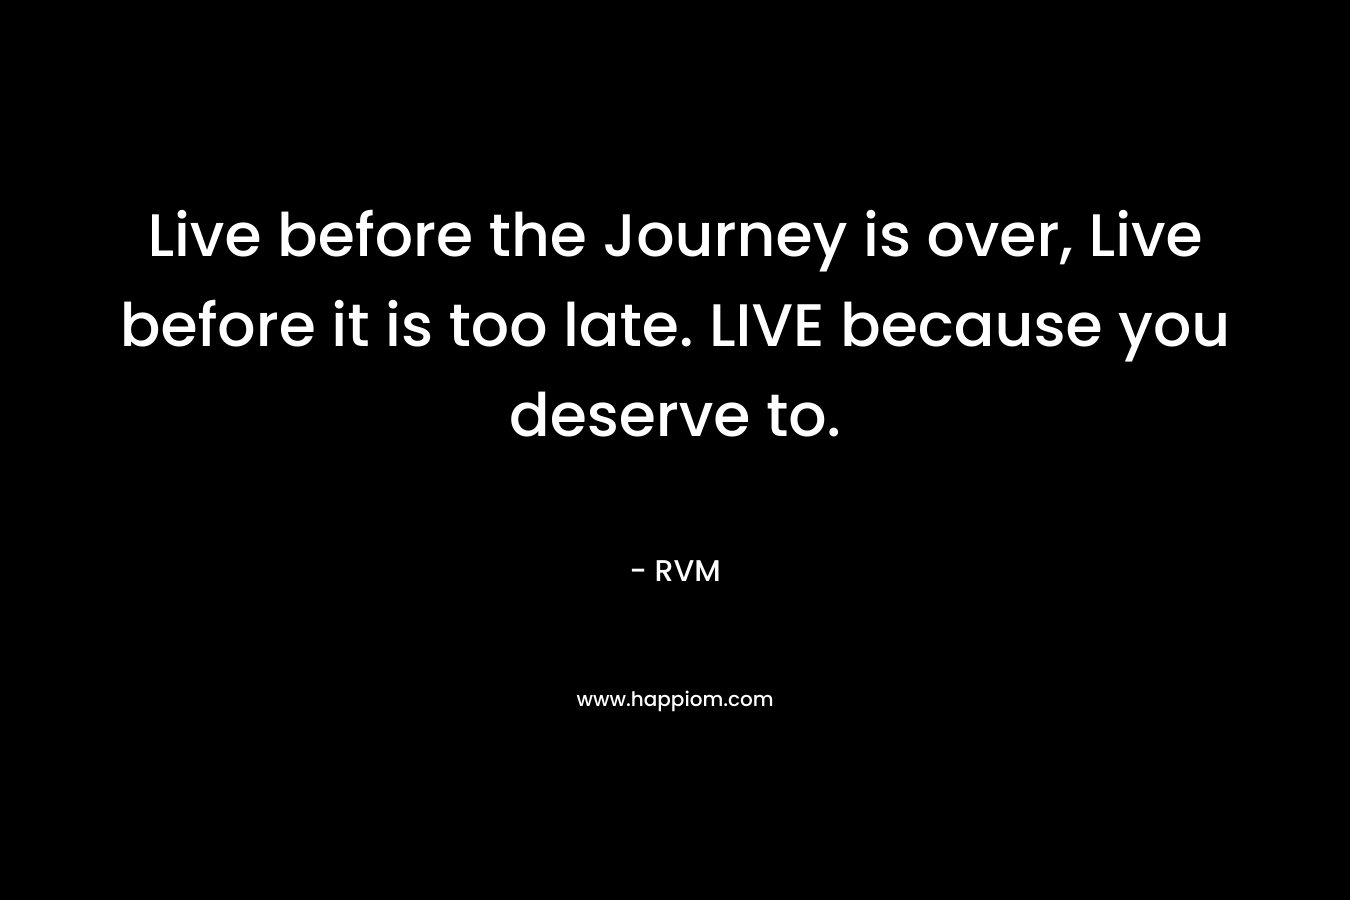 Live before the Journey is over, Live before it is too late. LIVE because you deserve to.